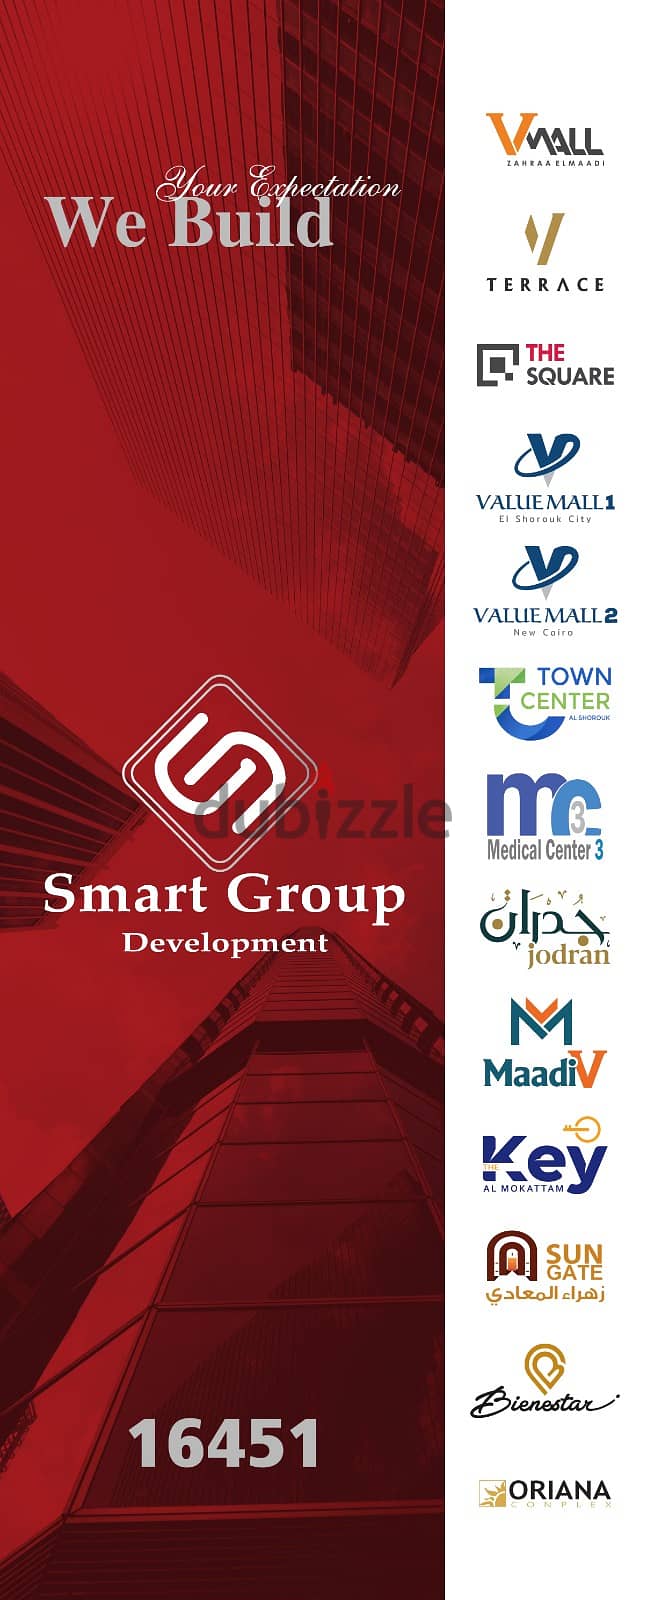 Shop for sale in Zahraa El Maadi, 81 meters, Maadi Mall, V Mall, installments and the longest payment period 4